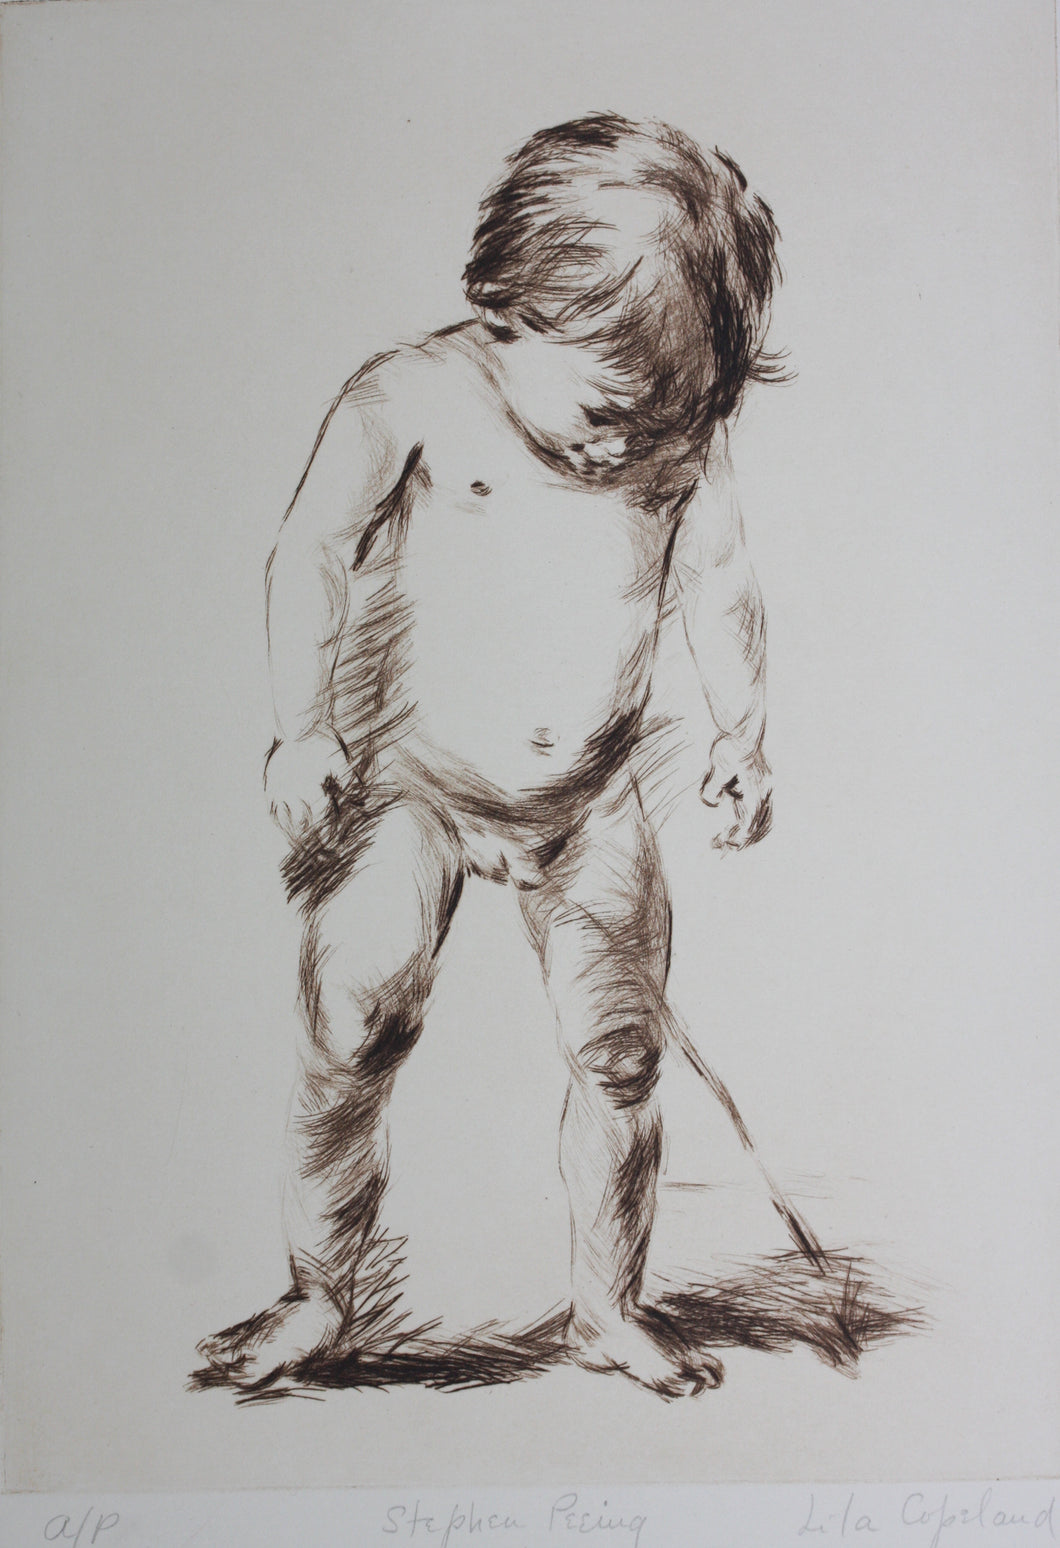 ﻿Lila Copeland. Stephen Peeing. Etching. 1950th - 1970th